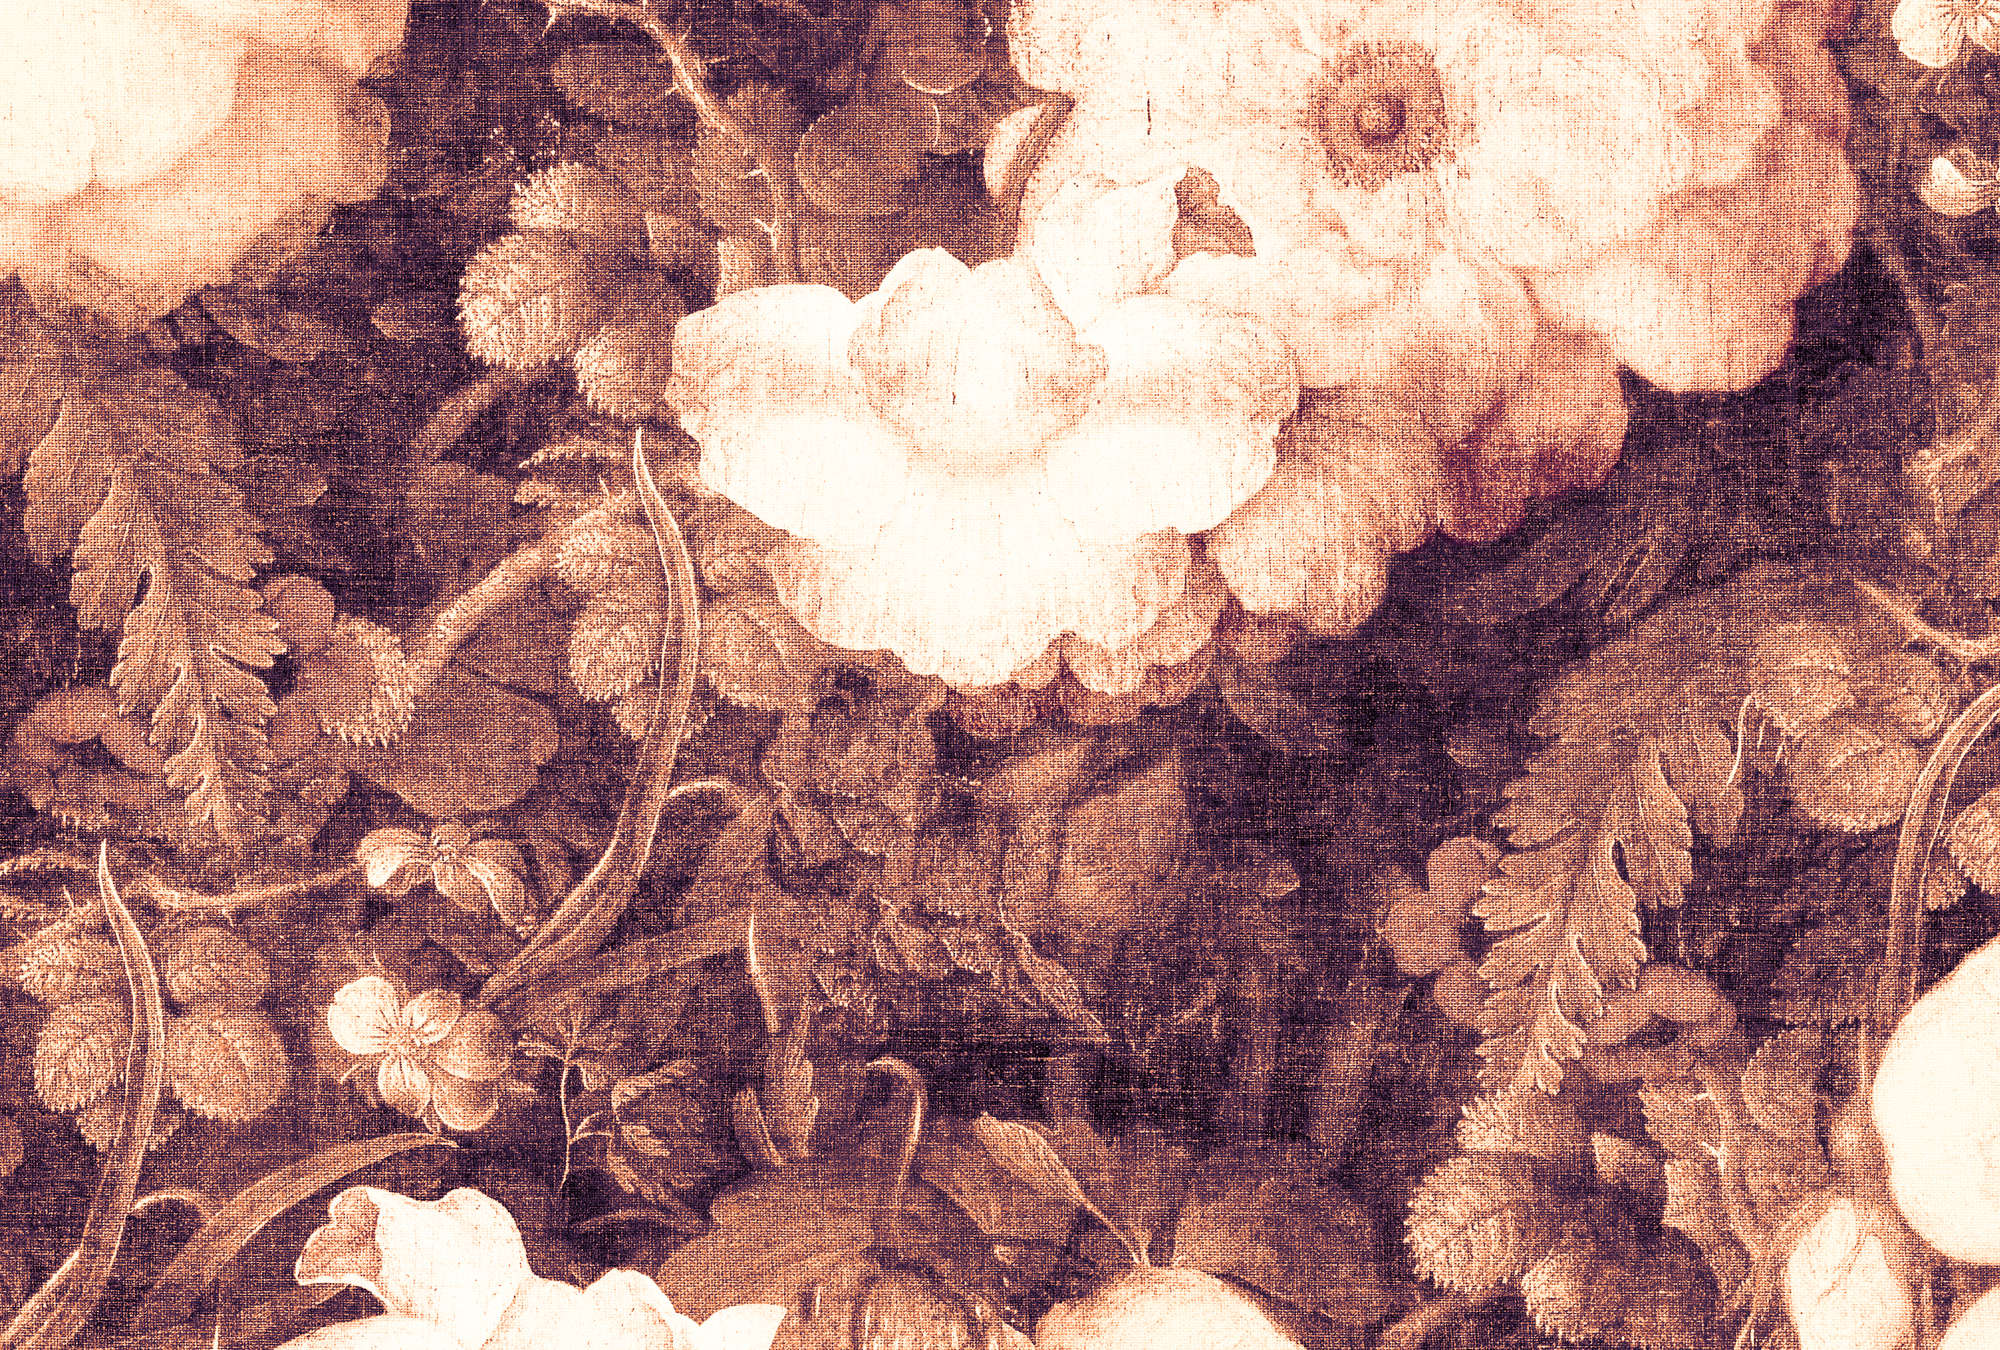             Photo wallpaper flowers historical style in sepia look - orange, white
        